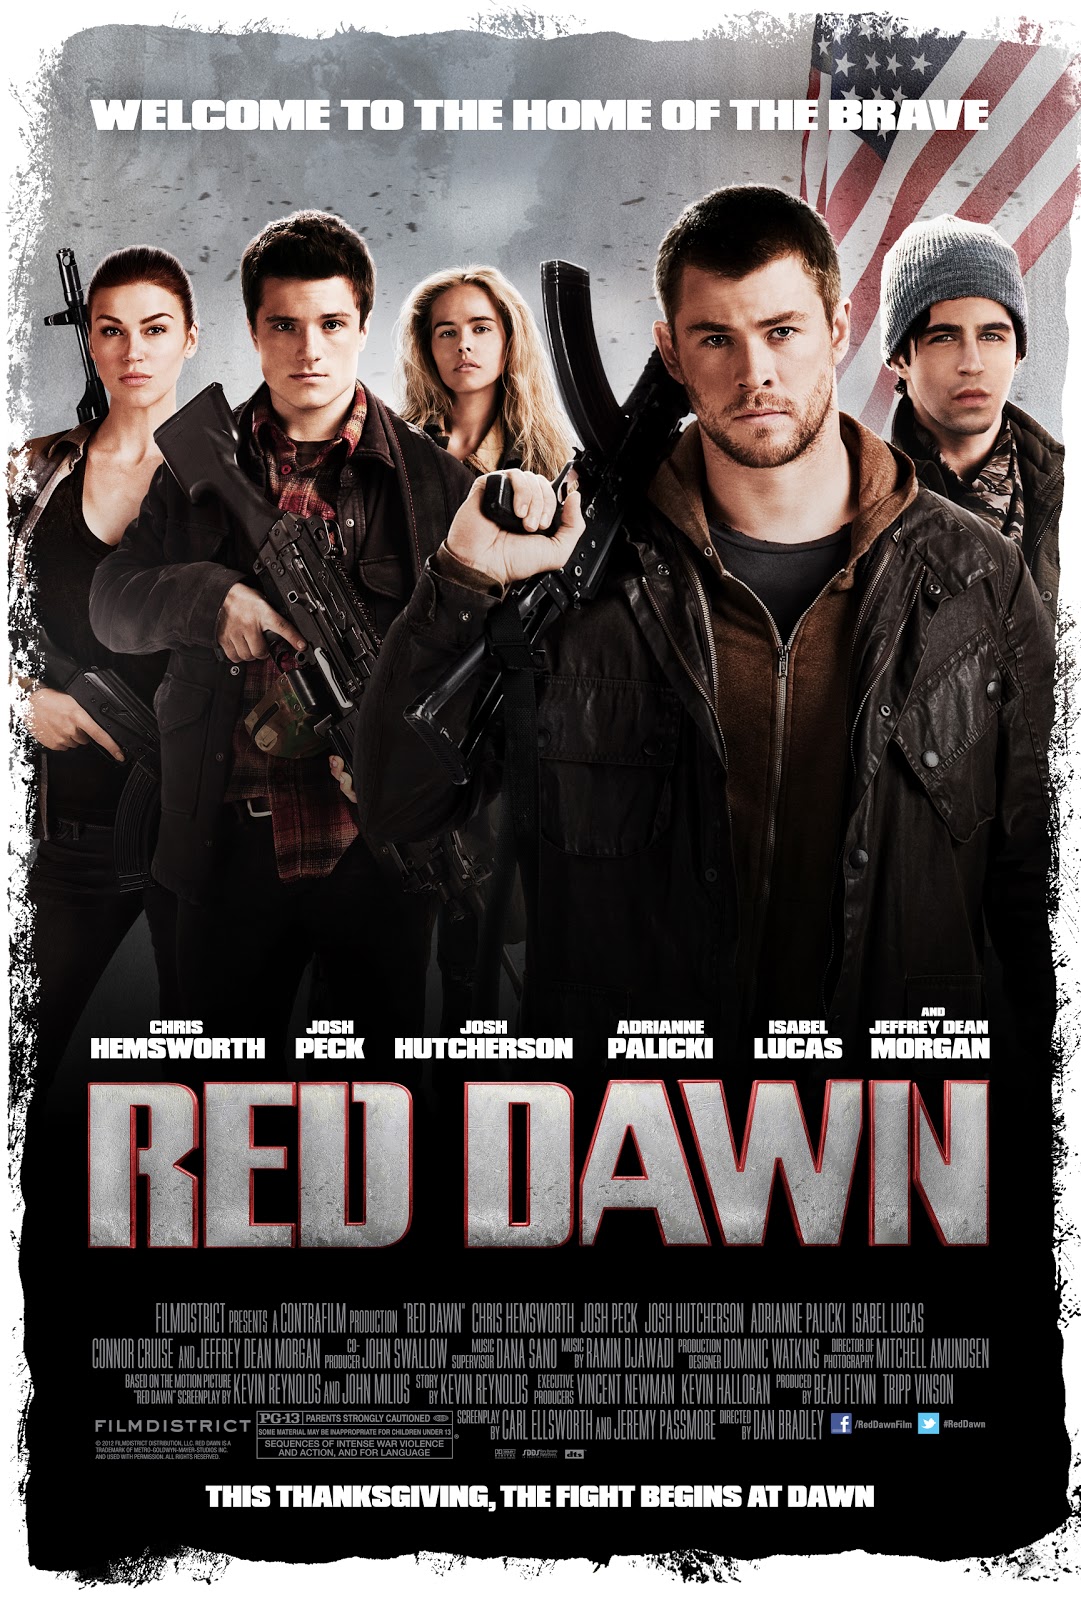 District 12: Red Dawn Trailer Images!